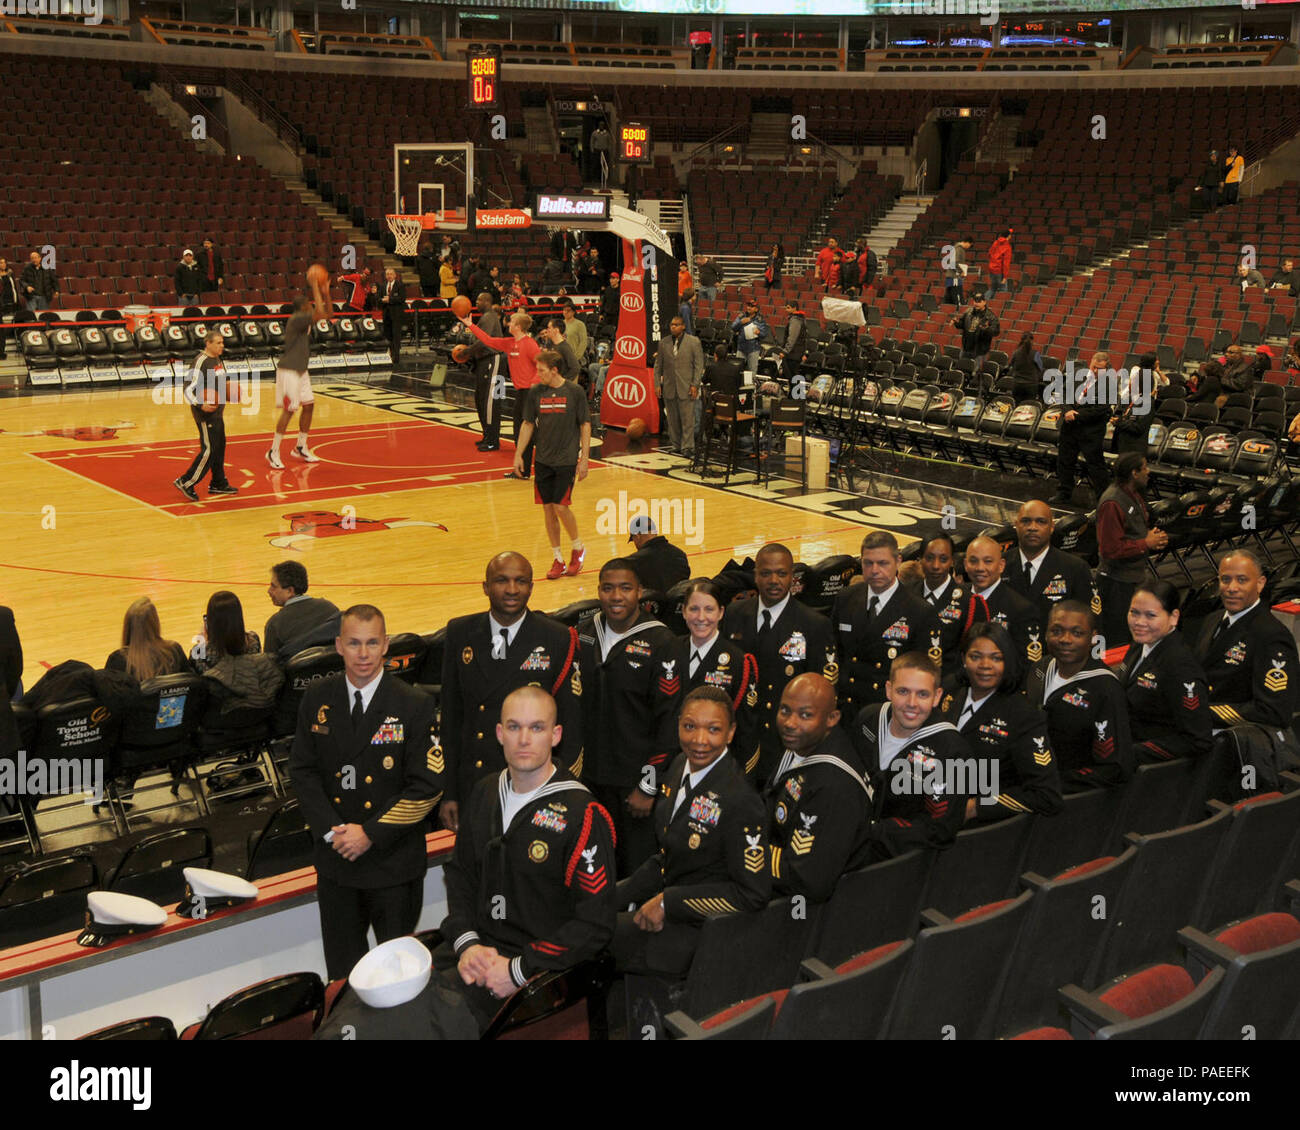 Finalists for the 2013 Manpower, Personnel, Training and Education (MPTandE) Sailor of the Year (SOY) competition were the guests of the Chicago Bulls professional basketball team